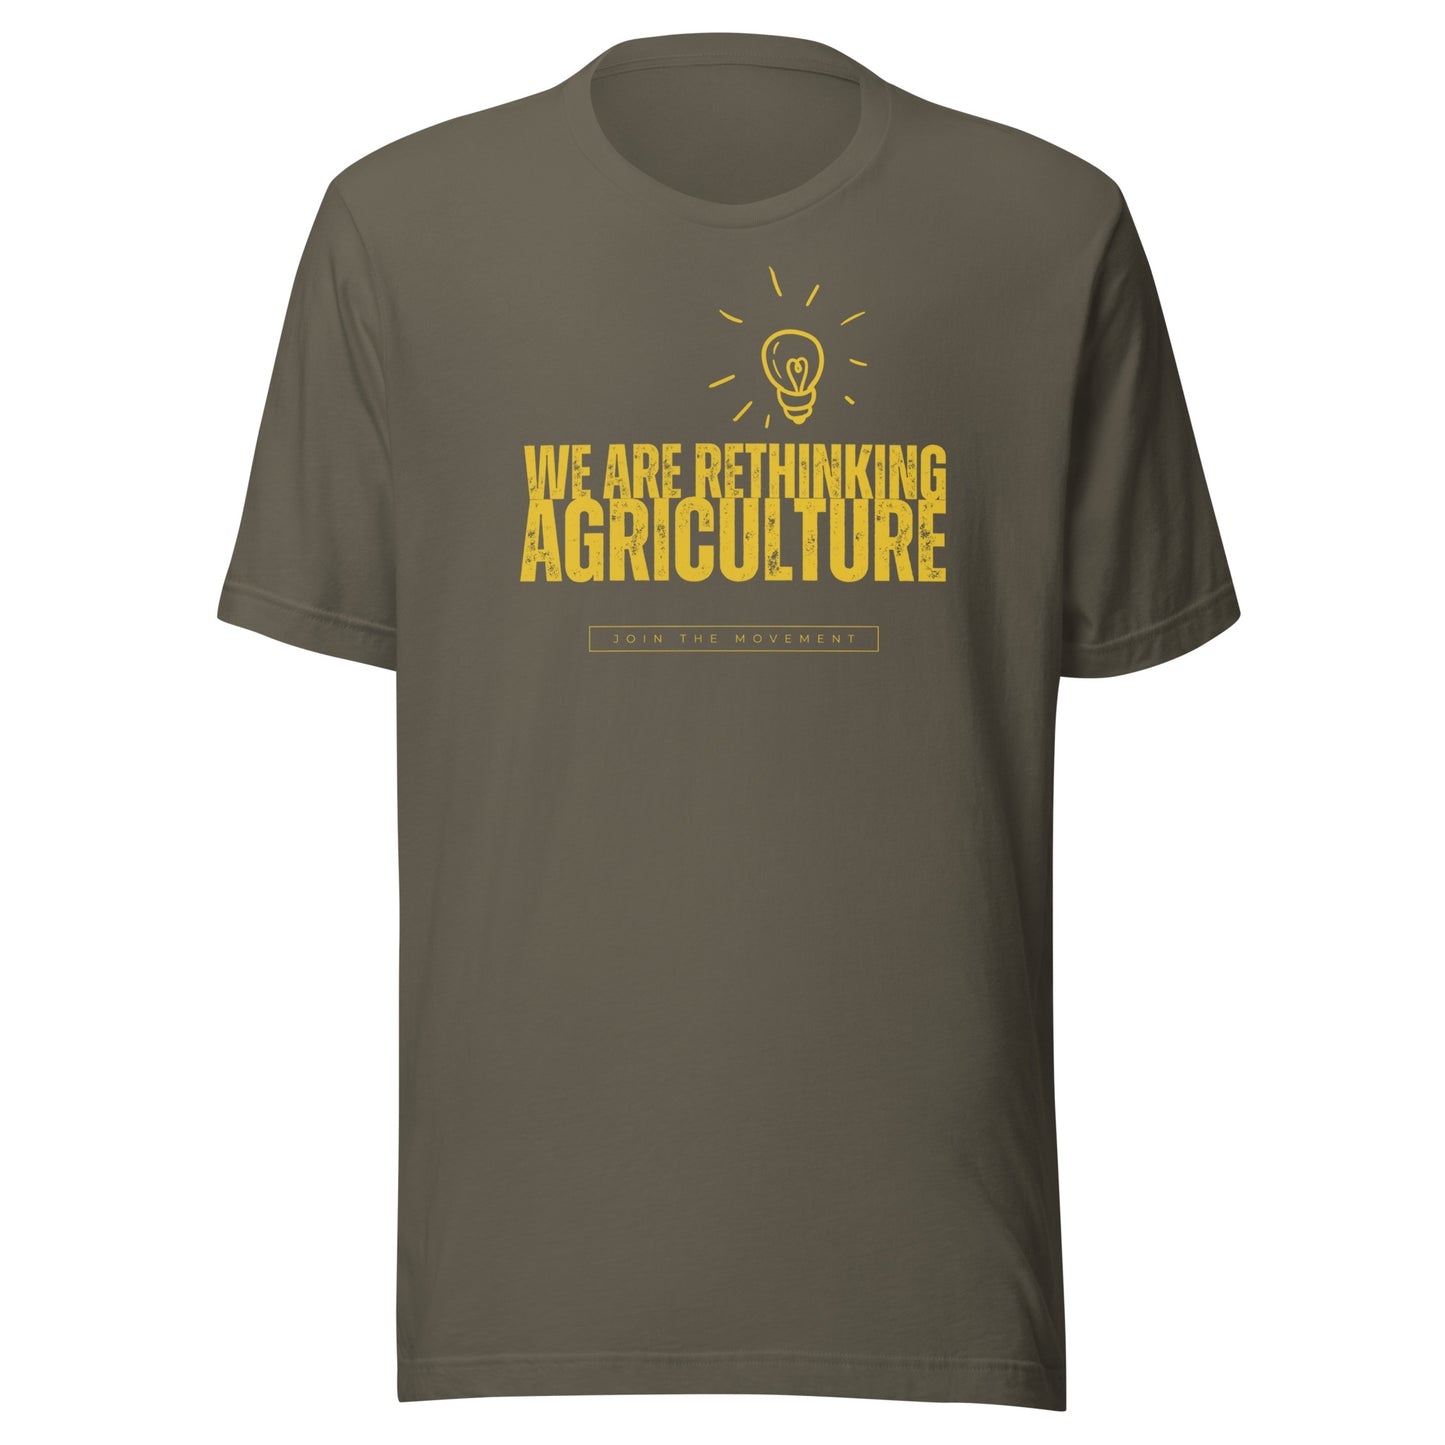 Rethinking Agriculture T-Shirt